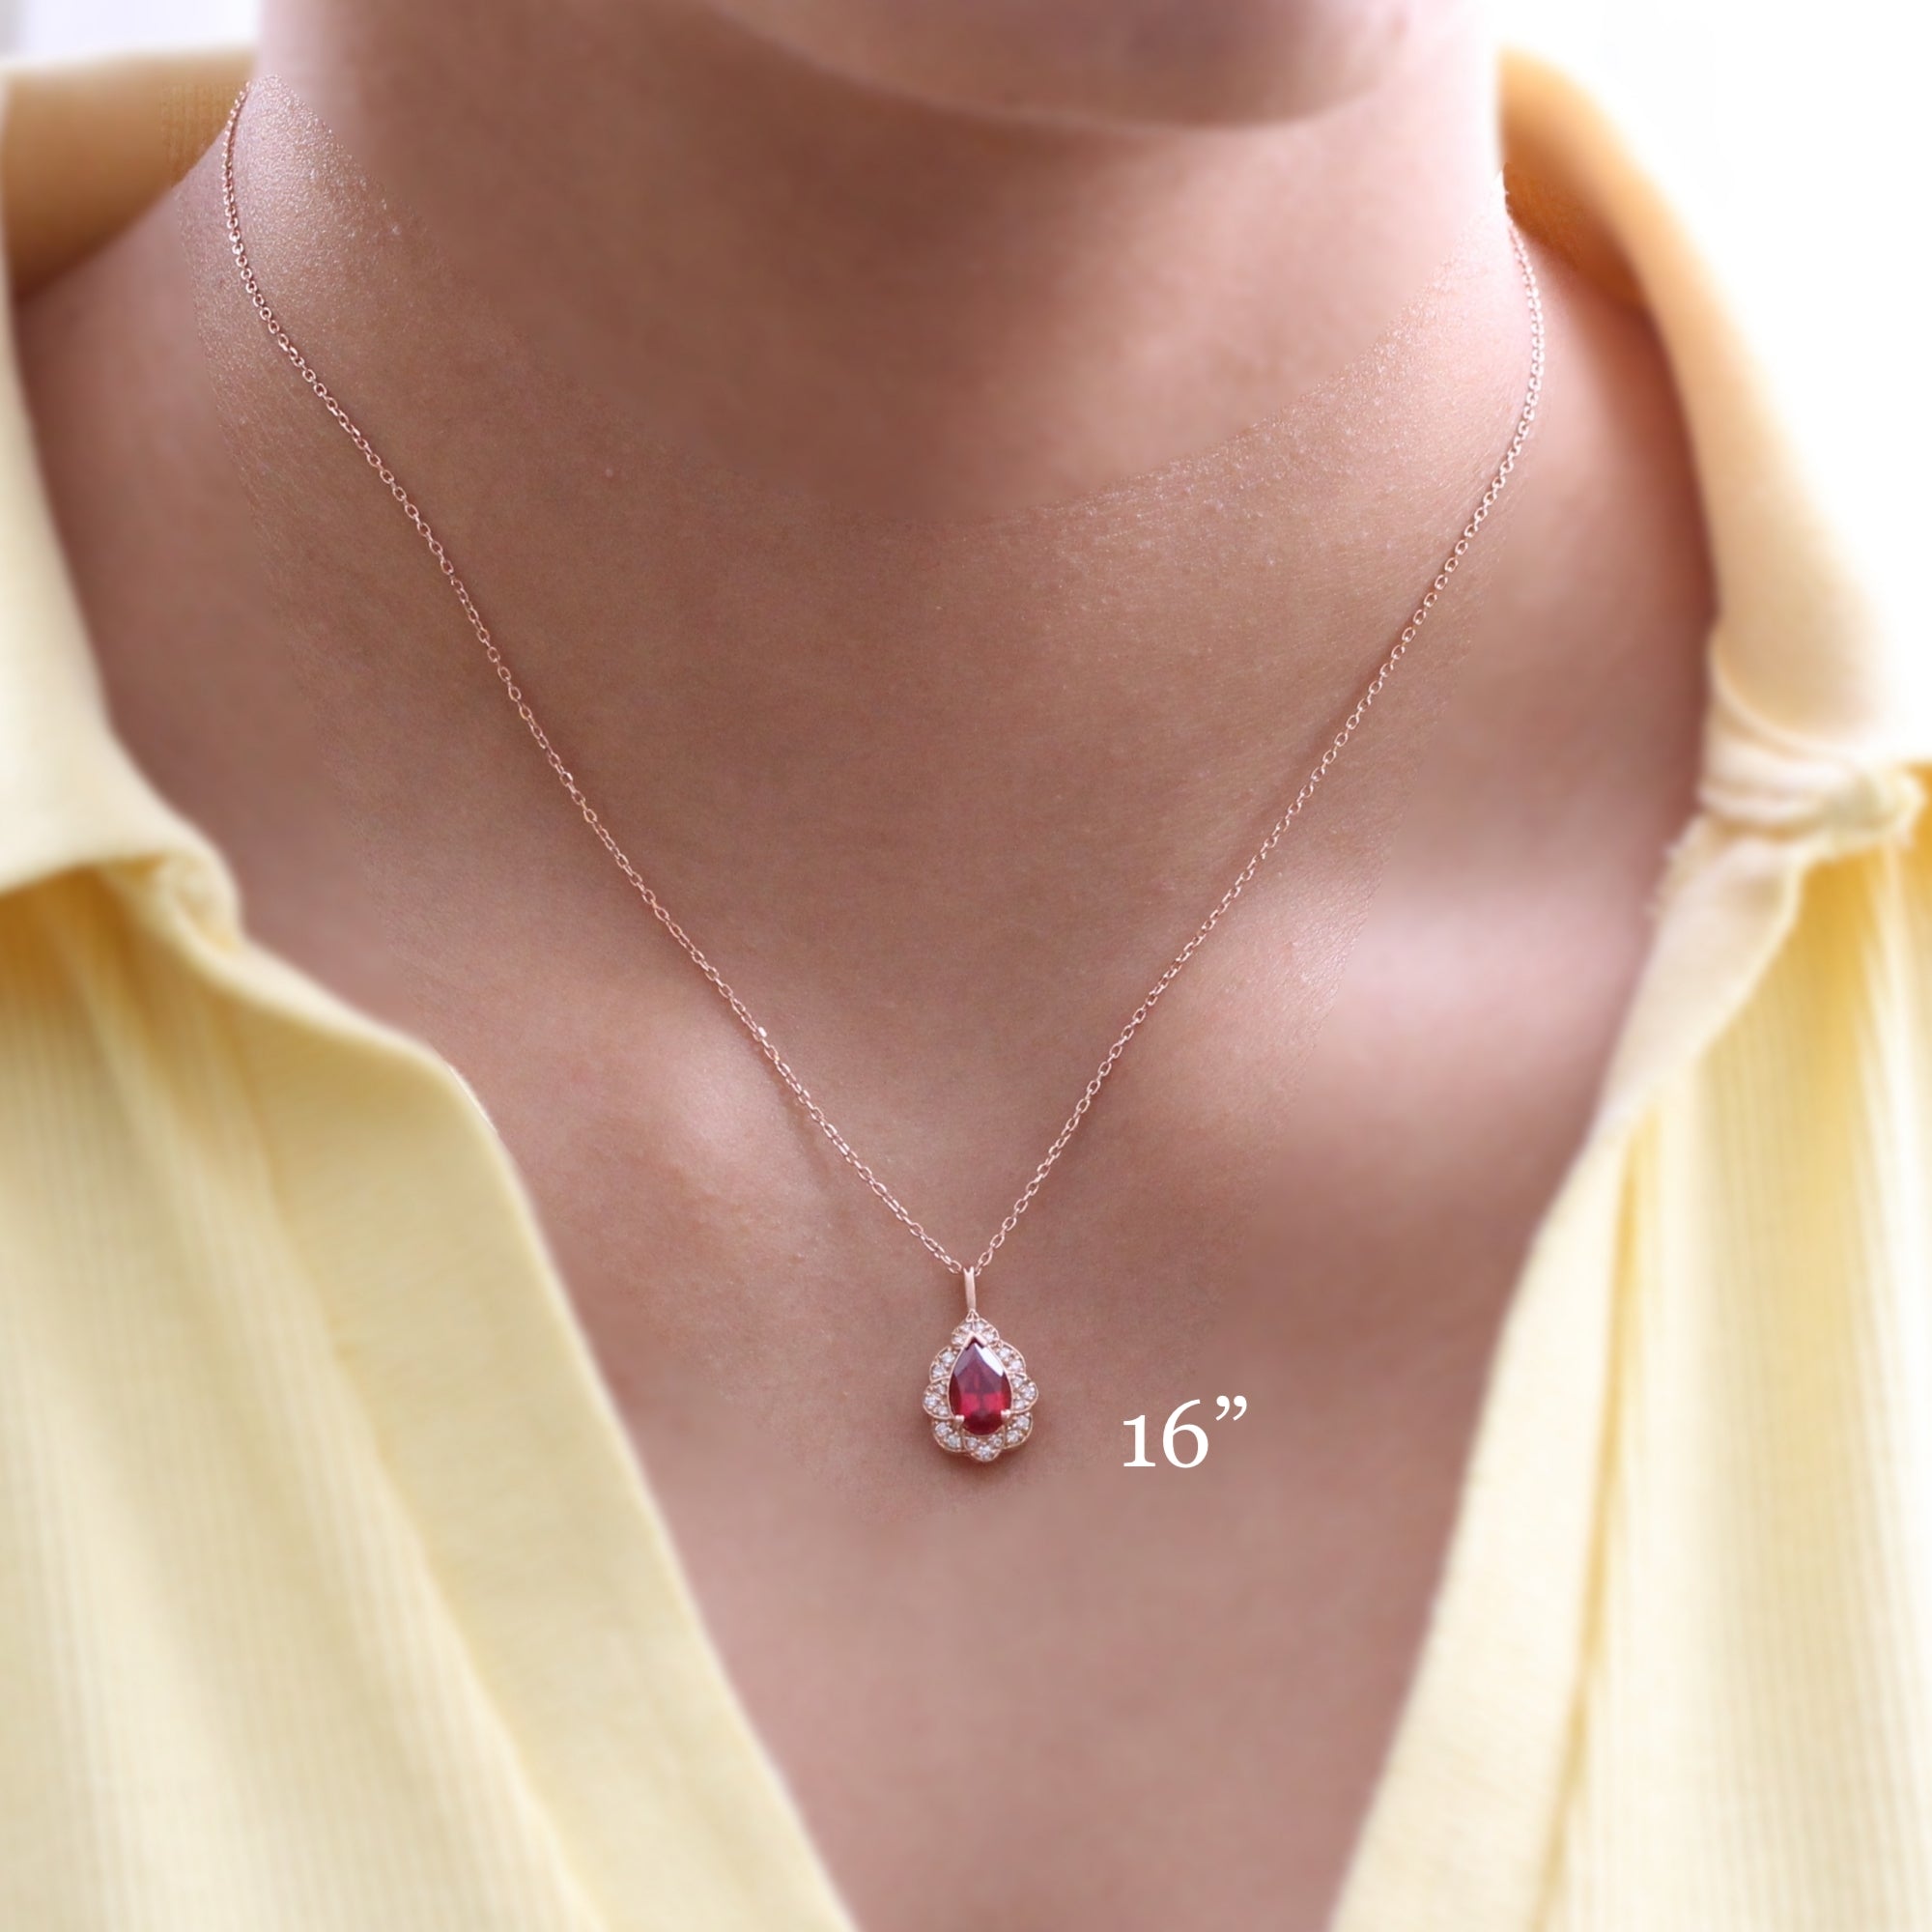 Pear ruby necklace rose gold vintage style ruby diamond drop pendant necklace la more design jewelry